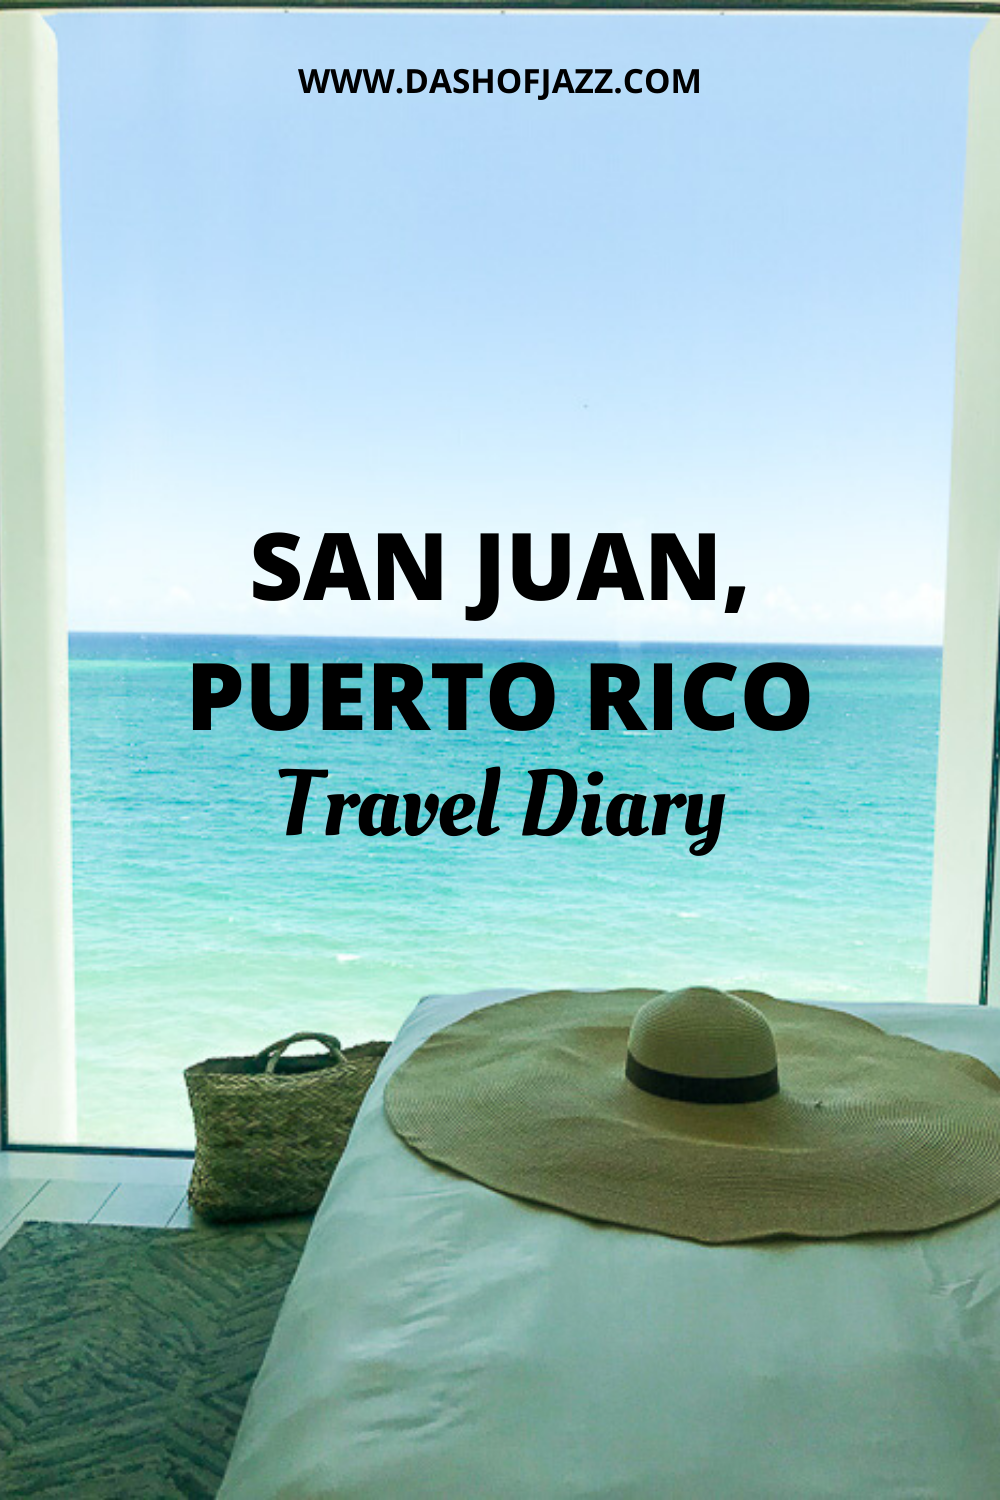 hotel room with ocean view and floppy hat on bed with text overlay "san juan, puerto rico travel diary"